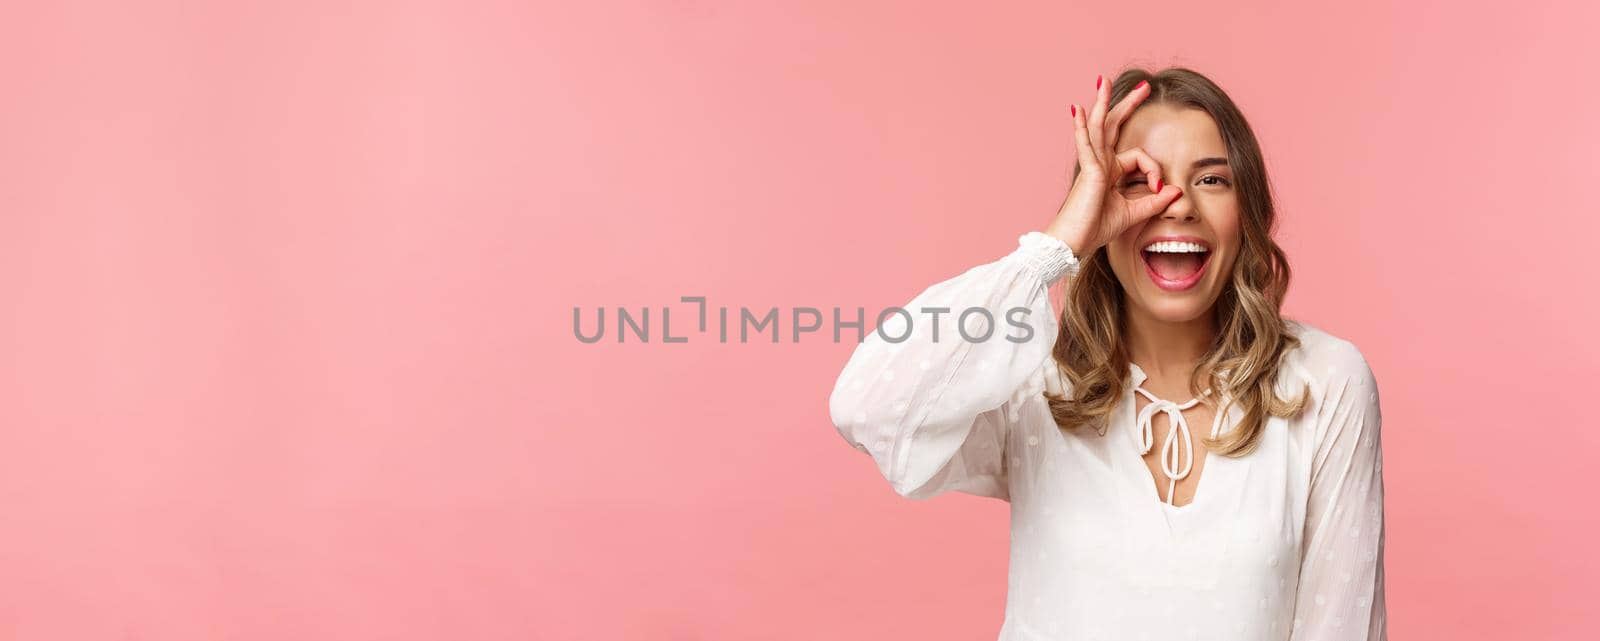 Close-up portrait of perfect good-looking blond girl in white dress, looking through okay sign and smiling, guarantee excellent quality, approve or like something, standing pink background.